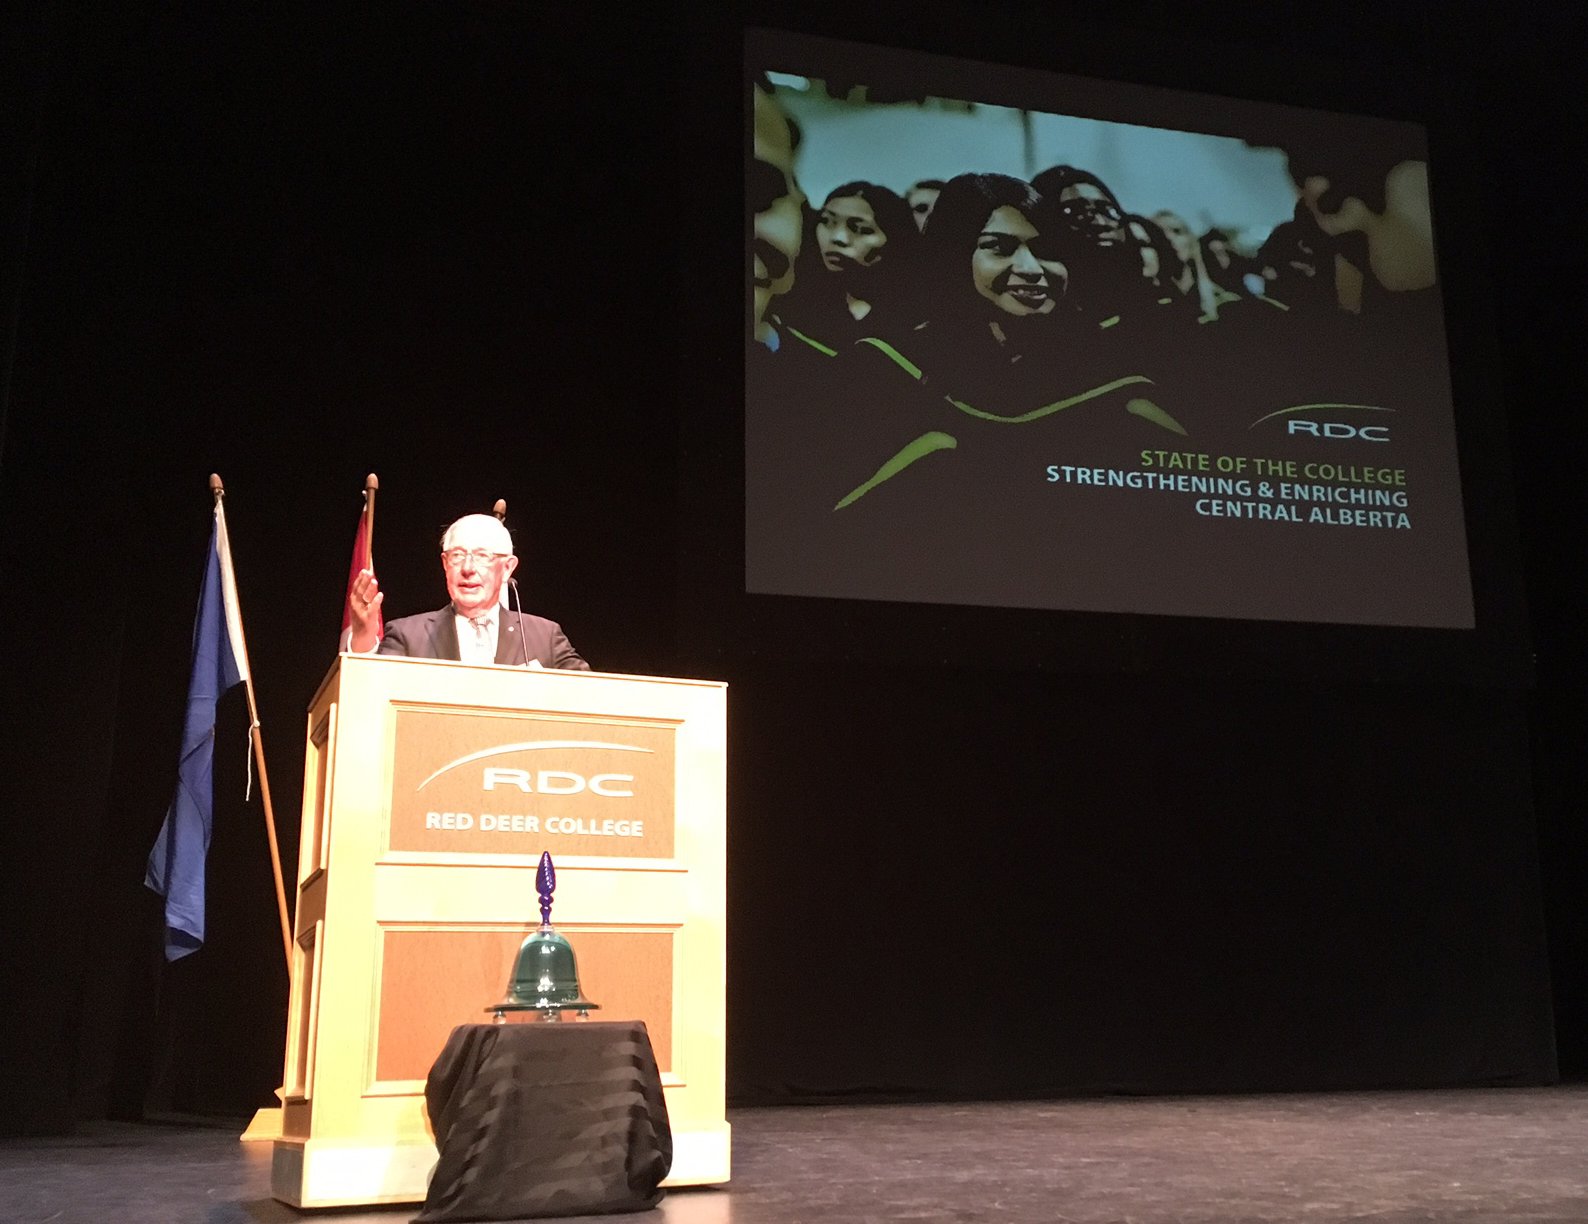 HONOUR - Morris Flewwelling has been named to the post chair for Red Deer College’s board of directors. He spoke about his excitement for the new role during a special State of the College Address at the Arts Centre on Wednesday.